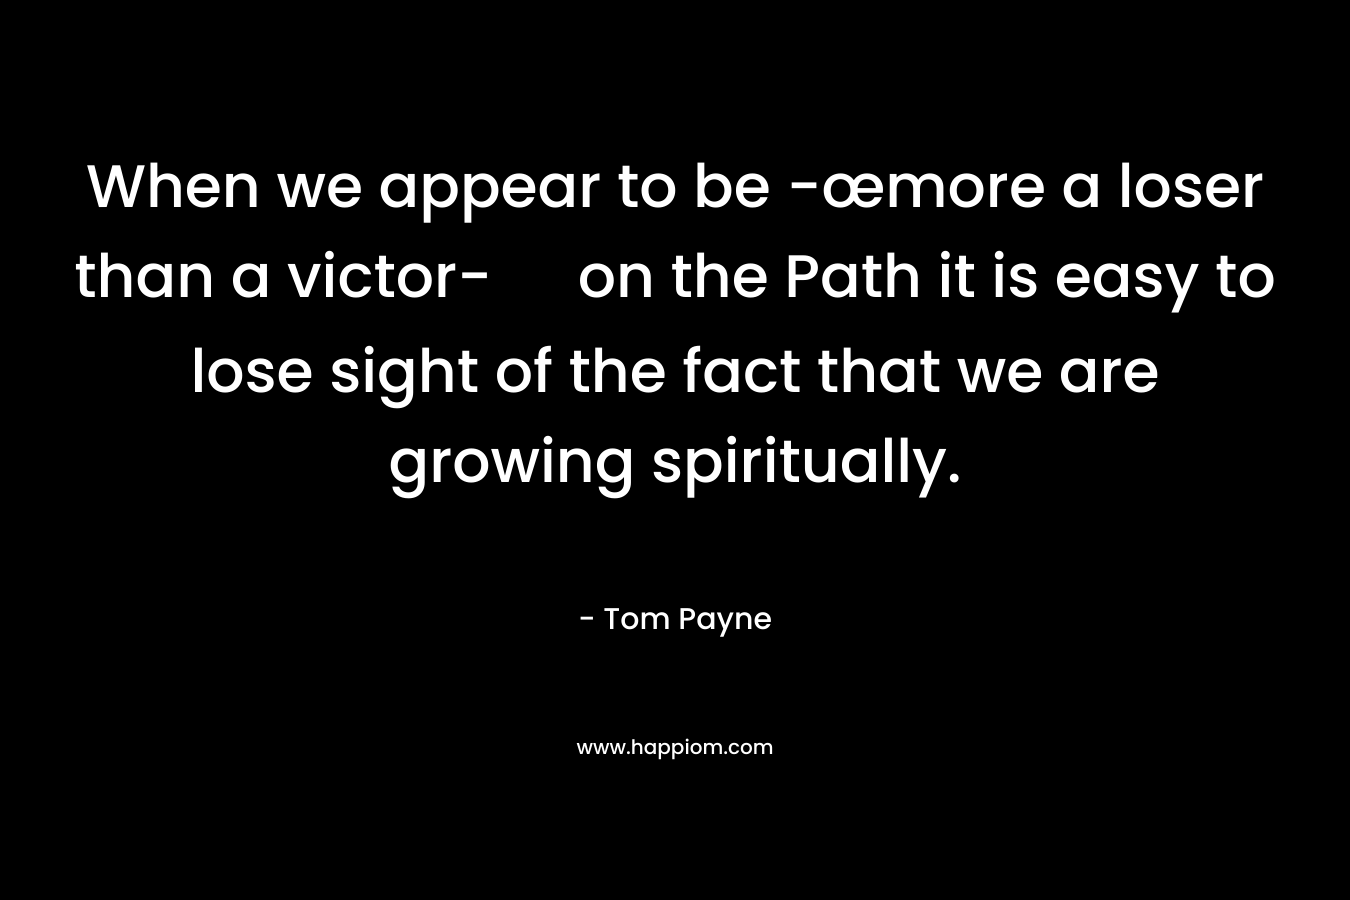 When we appear to be -œmore a loser than a victor- on the Path it is easy to lose sight of the fact that we are growing spiritually. – Tom Payne